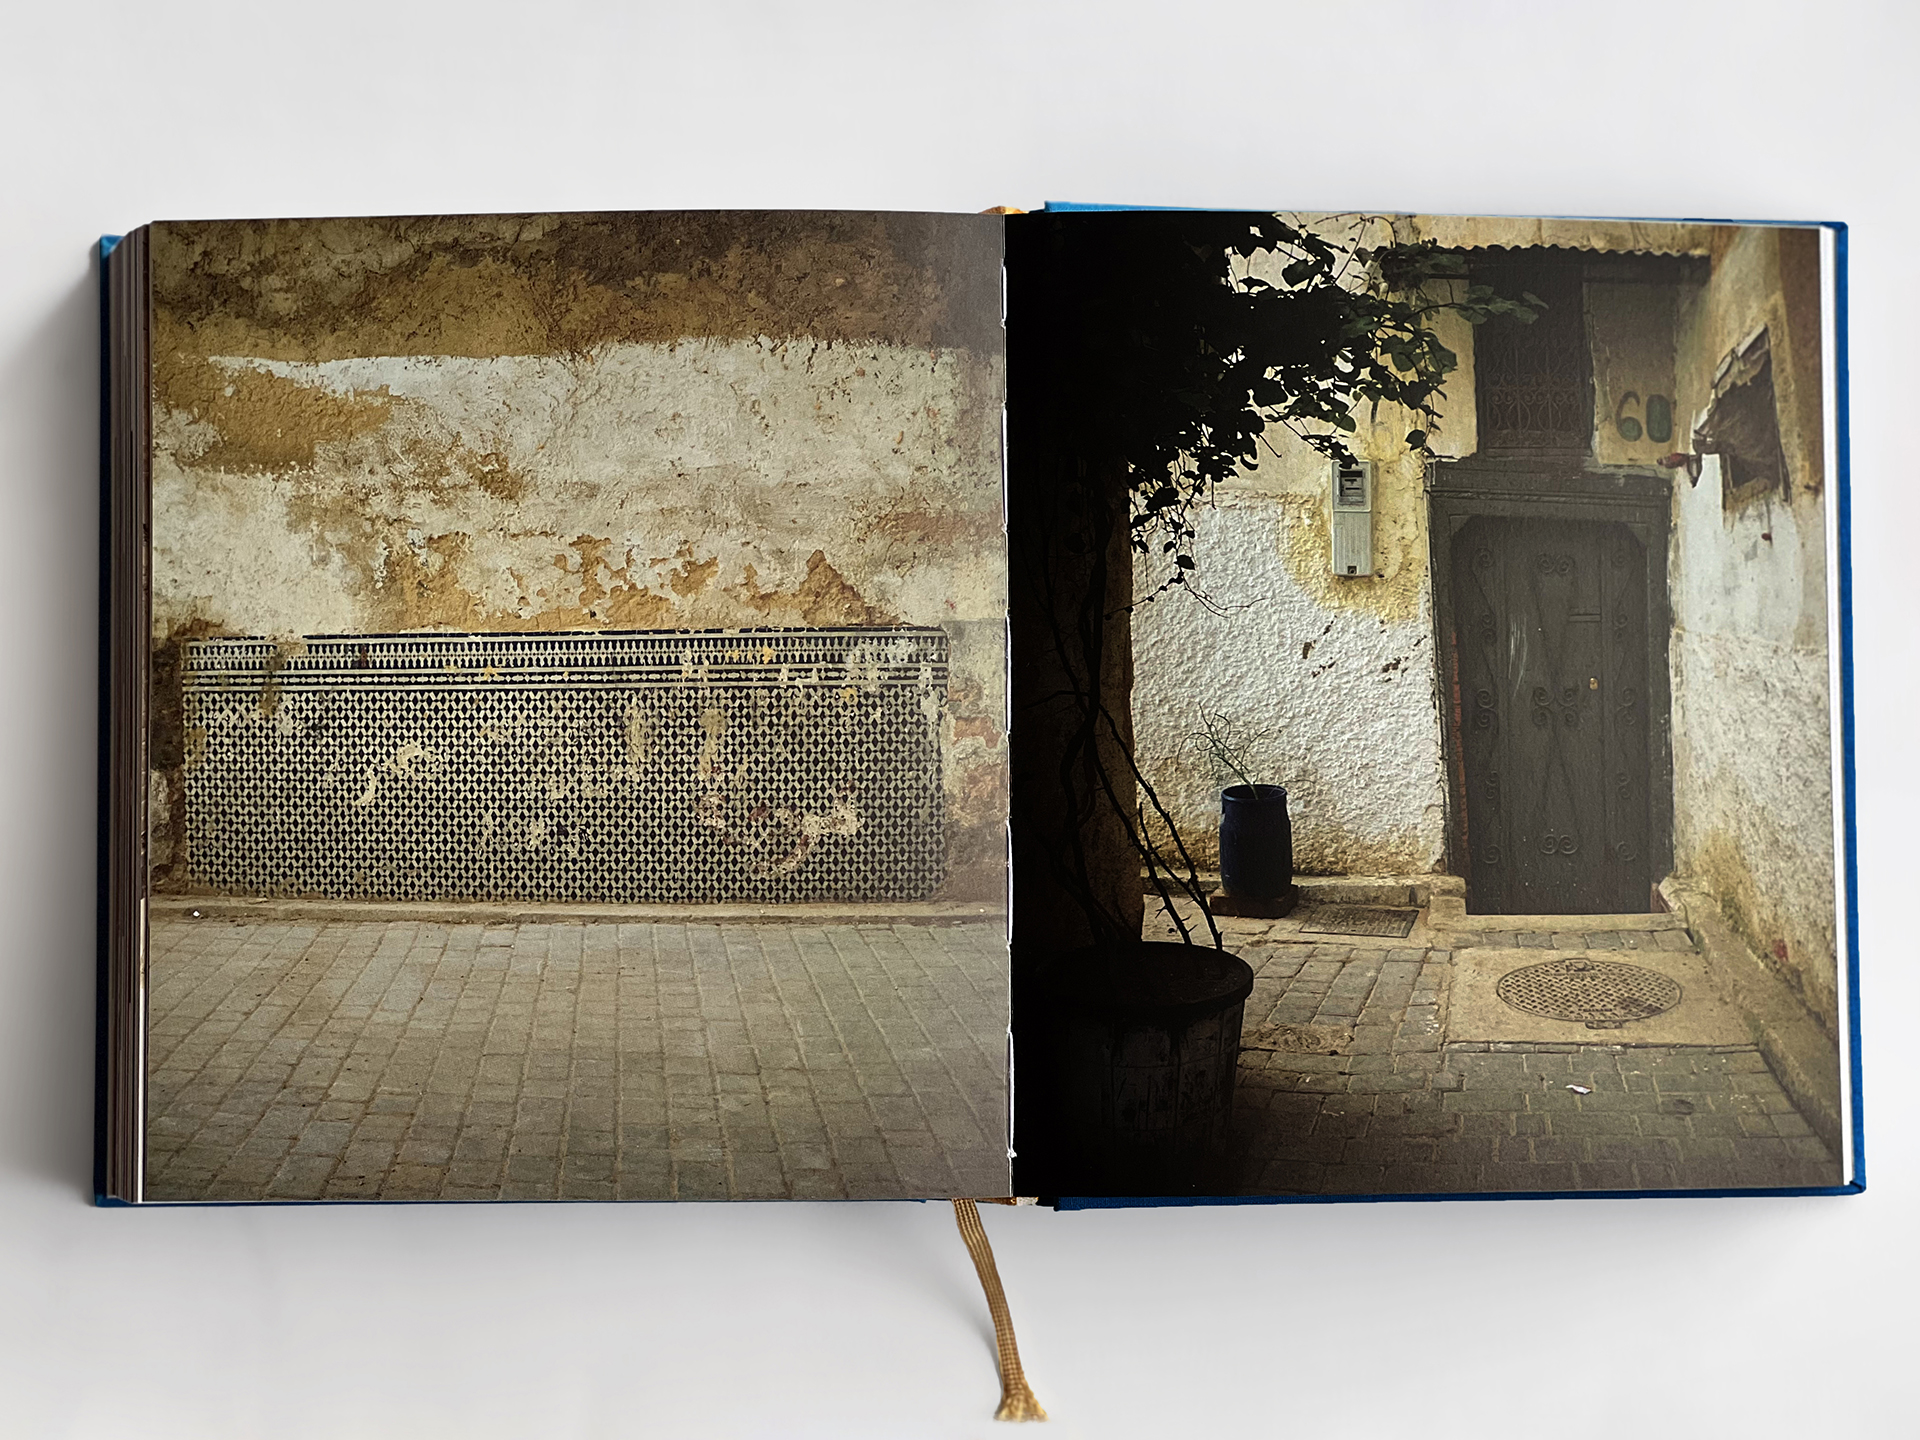 Pages from the book “Ivana Ivković facing Morocco“, open book image